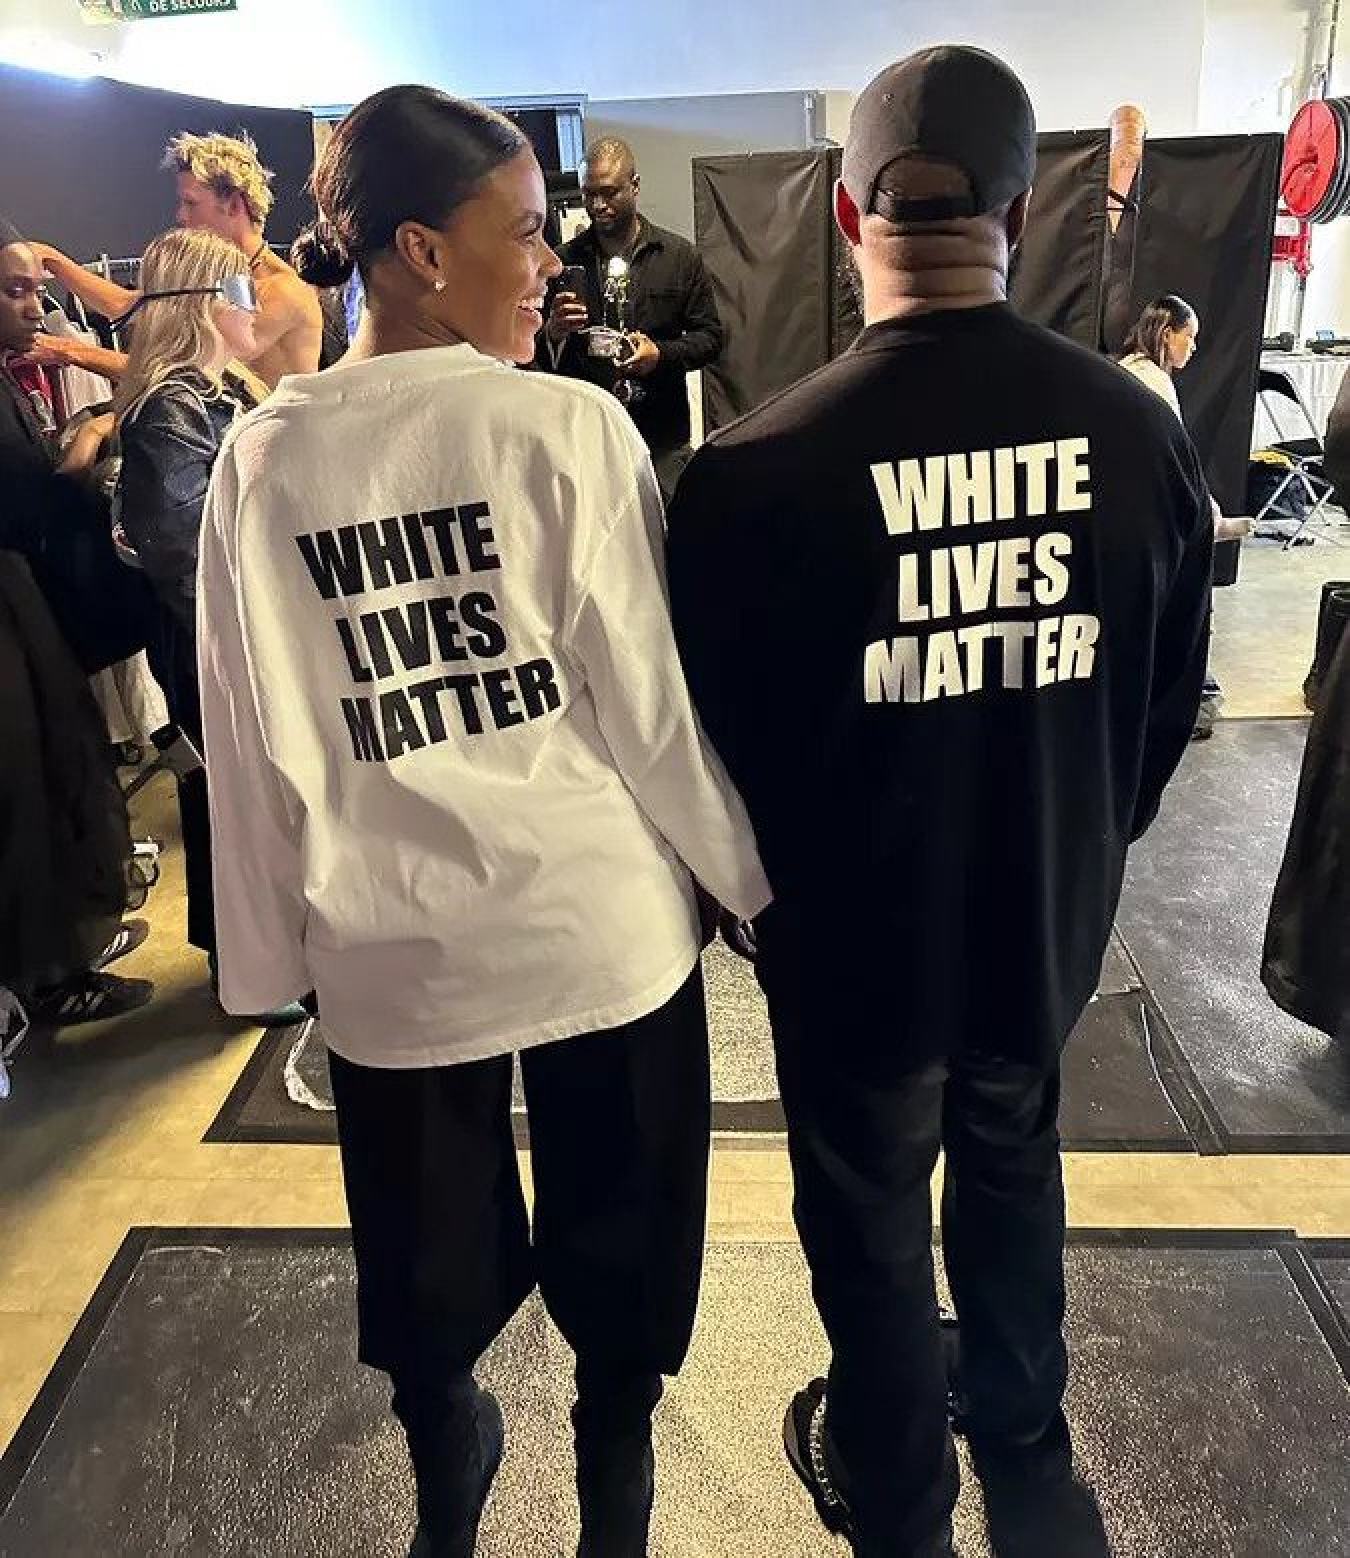 Who Is Candace Owens Seen With Ye In White Lives Matter Shirts She Wore The Controversial Top